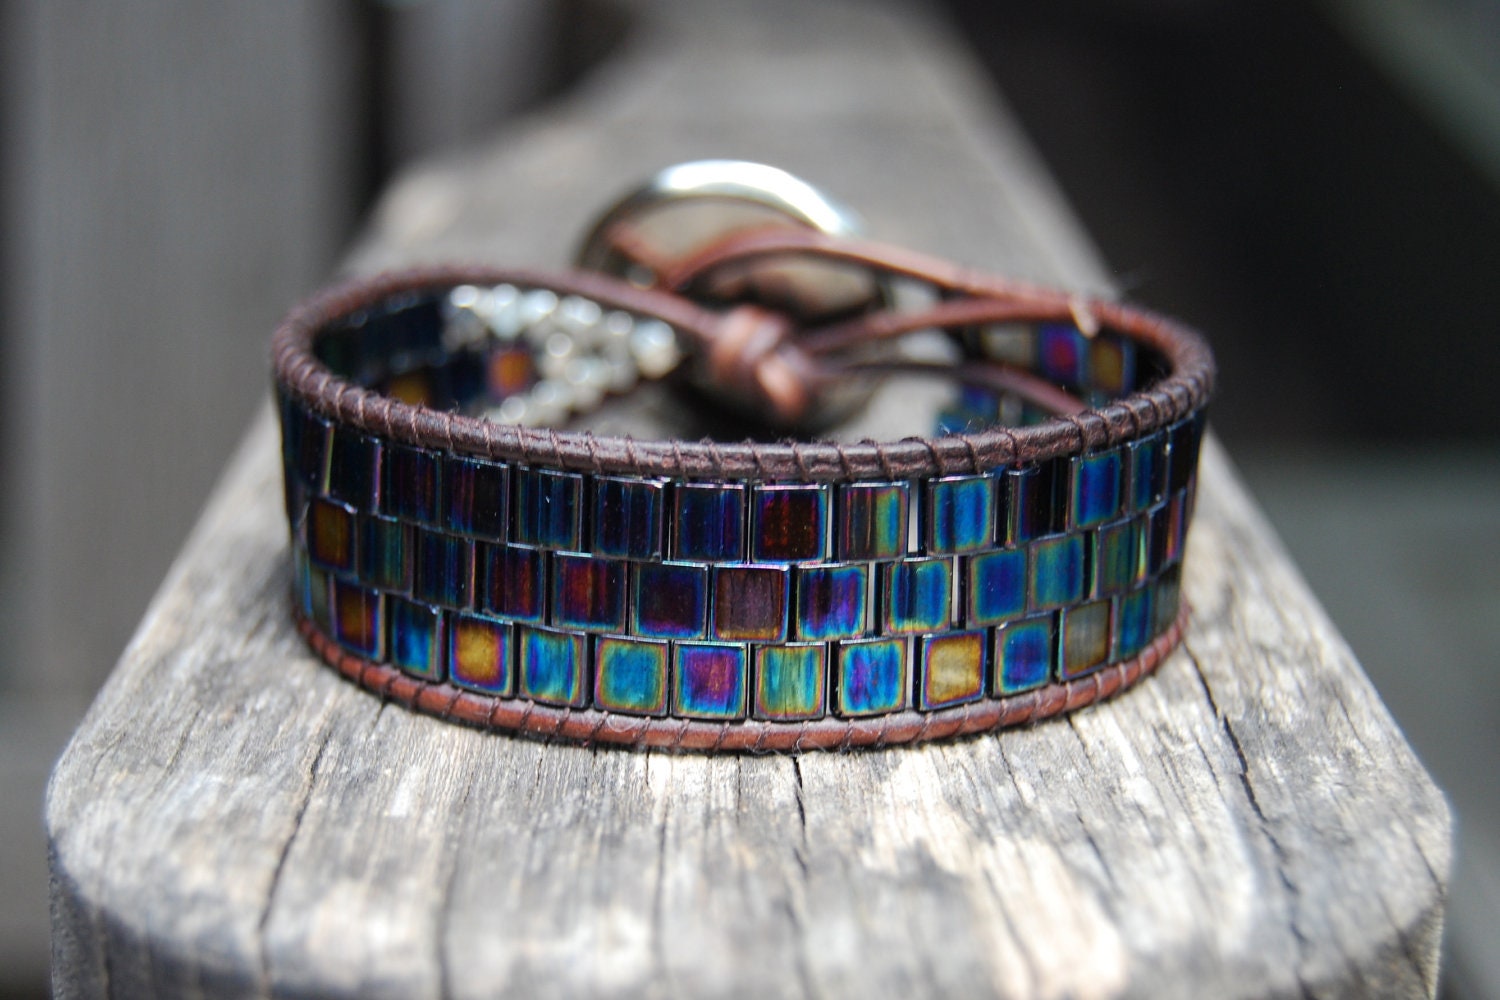 Wrapped Leather Bracelet with Metallic Blue / Purple / Turquoise Tila Beads, Silver Rondelles & Vintage Star Button - Shooting Star